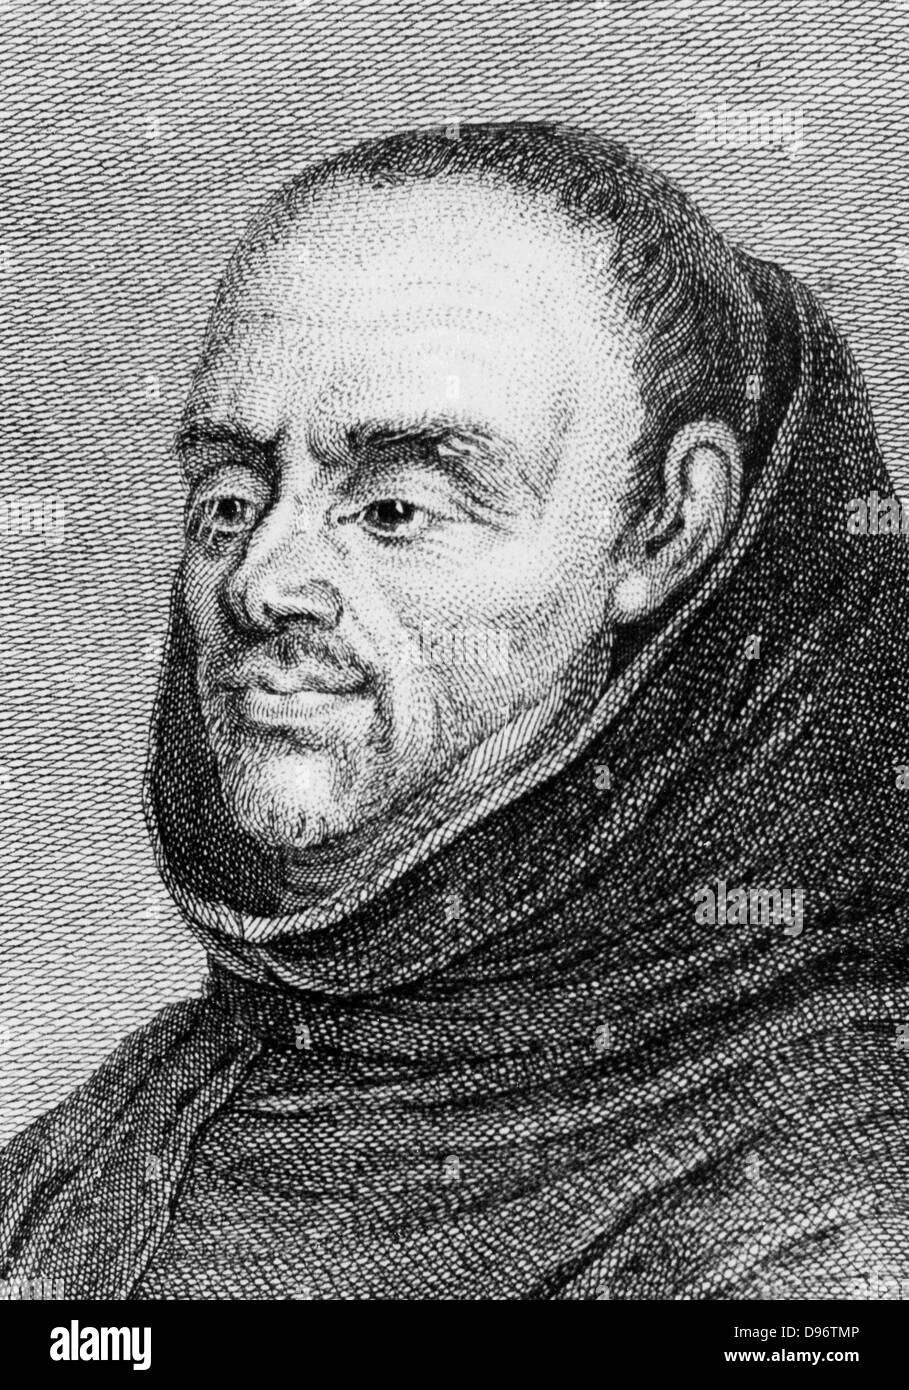 Charles Plumier (1646-1704) French friar, botanist and botanical explorer, was born at Marseilles. Appointed royal botanist by Louis XIV in 1693. Made expeditions to the West Indies and Central America. Gave the first accurate account of the source of the red dye cochineal which is an insect, not the plant on which it is found. Linnaeus named the genus Plumeria after him. From 'Histoire des Philosophes Modernes' by Alexandre Saverien. (Paris, 1762). Stock Photo